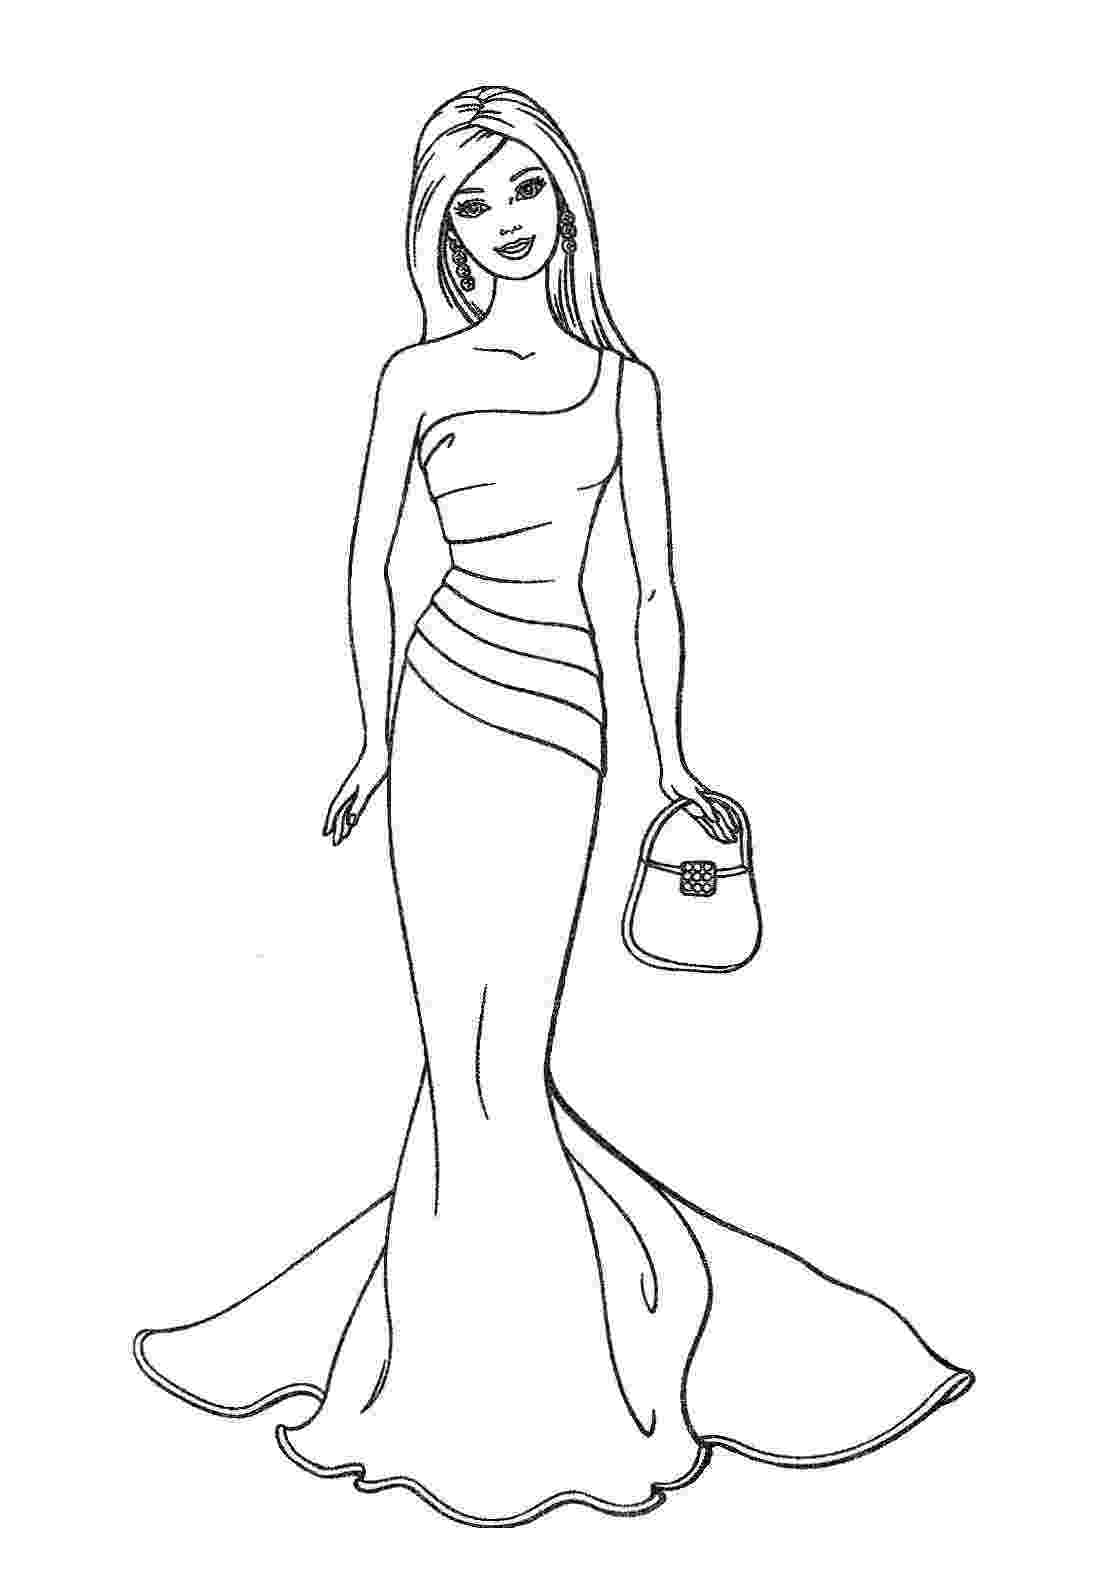 barbie coloring pages for kids coloring pages barbie free printable coloring pages coloring kids pages barbie for 